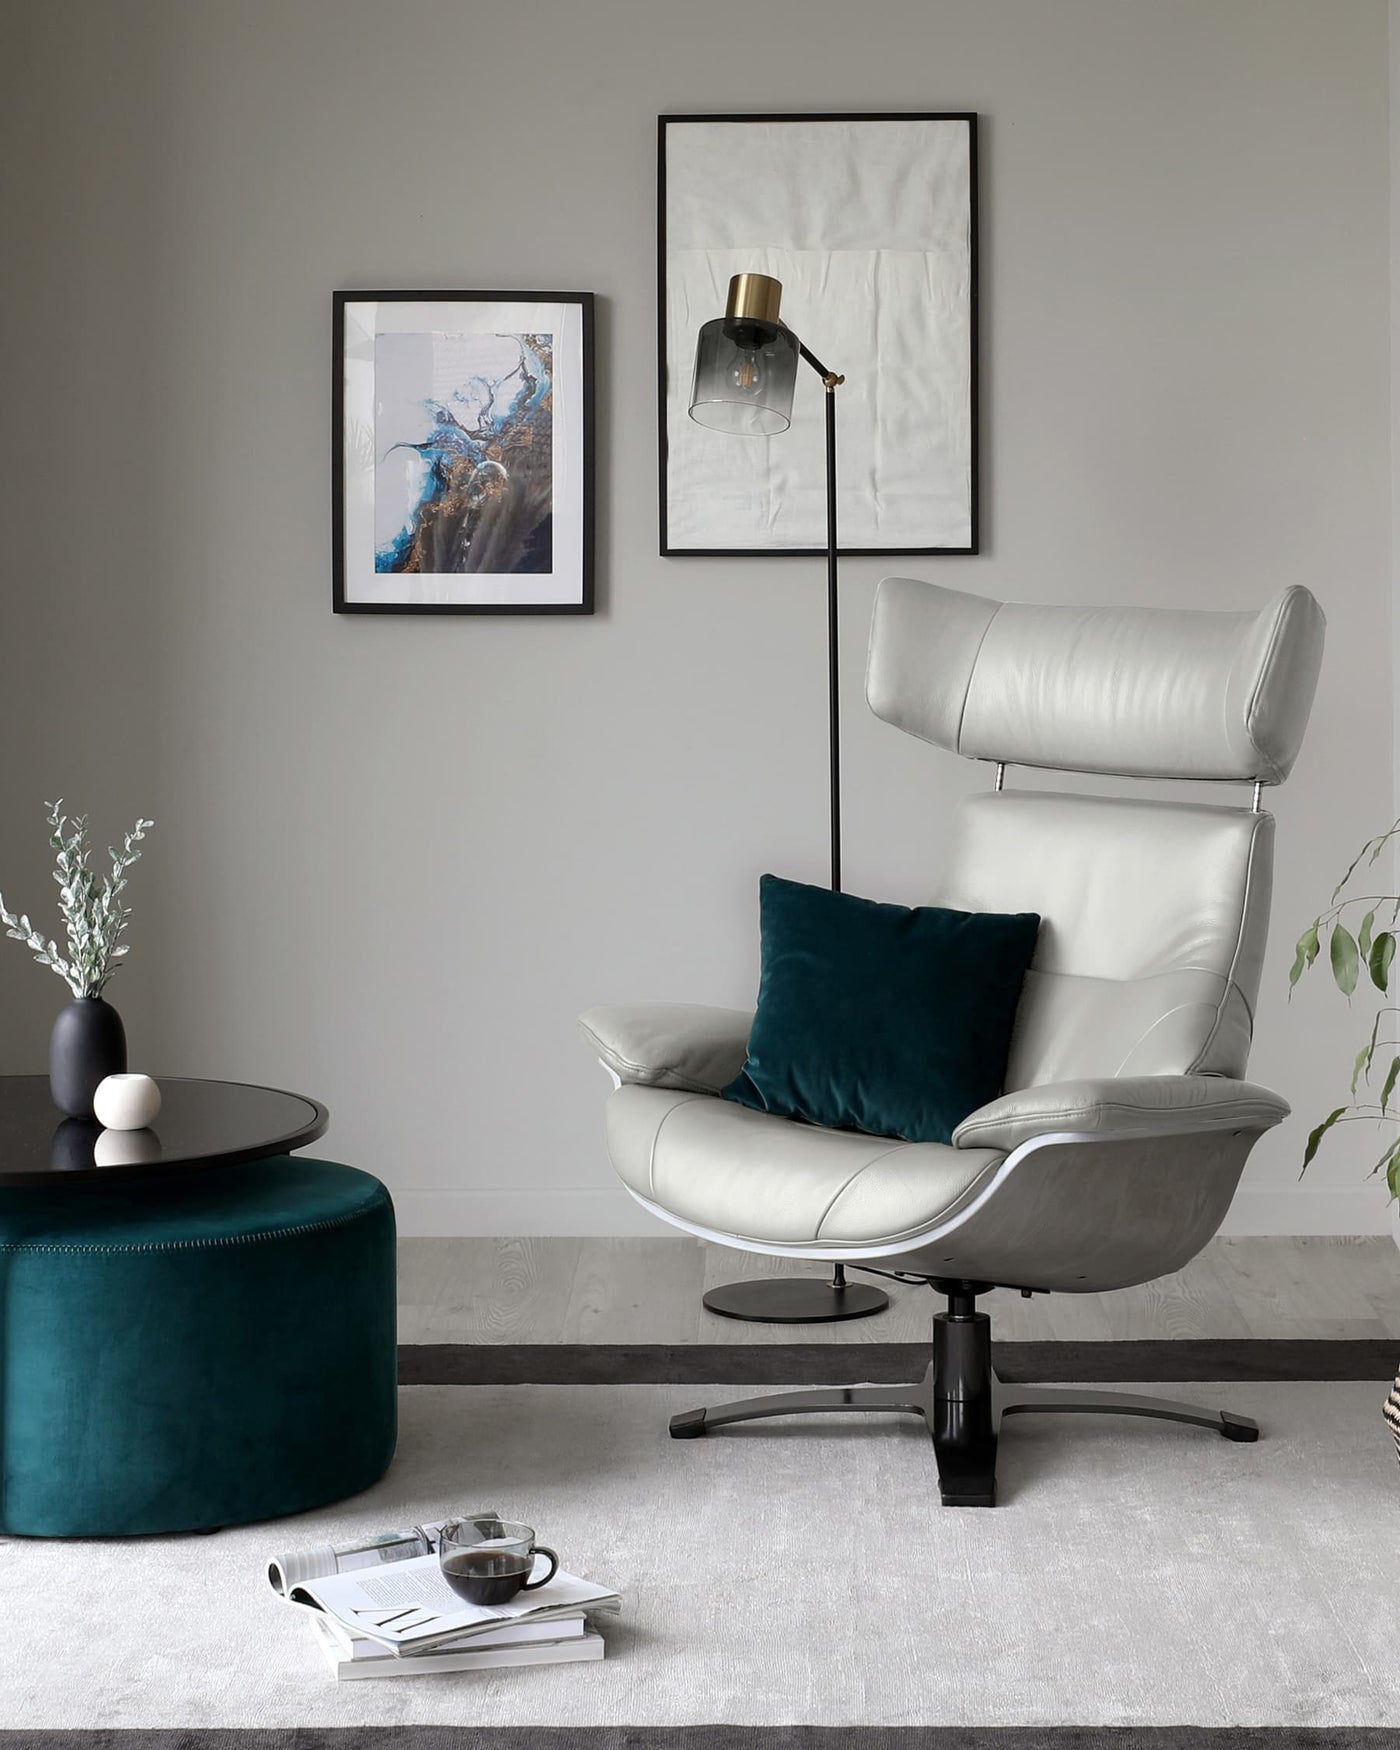 Modern living room setup with a sleek white leather recliner featuring a curved backrest and a contoured seat, complemented by a plush teal accent pillow. A round black coffee table with a matte top and a cylindrical emerald green velvet ottoman add a touch of luxe and colour contrast to the space. A white area rug anchors the arrangement, enhancing the minimalist and chic ambiance.